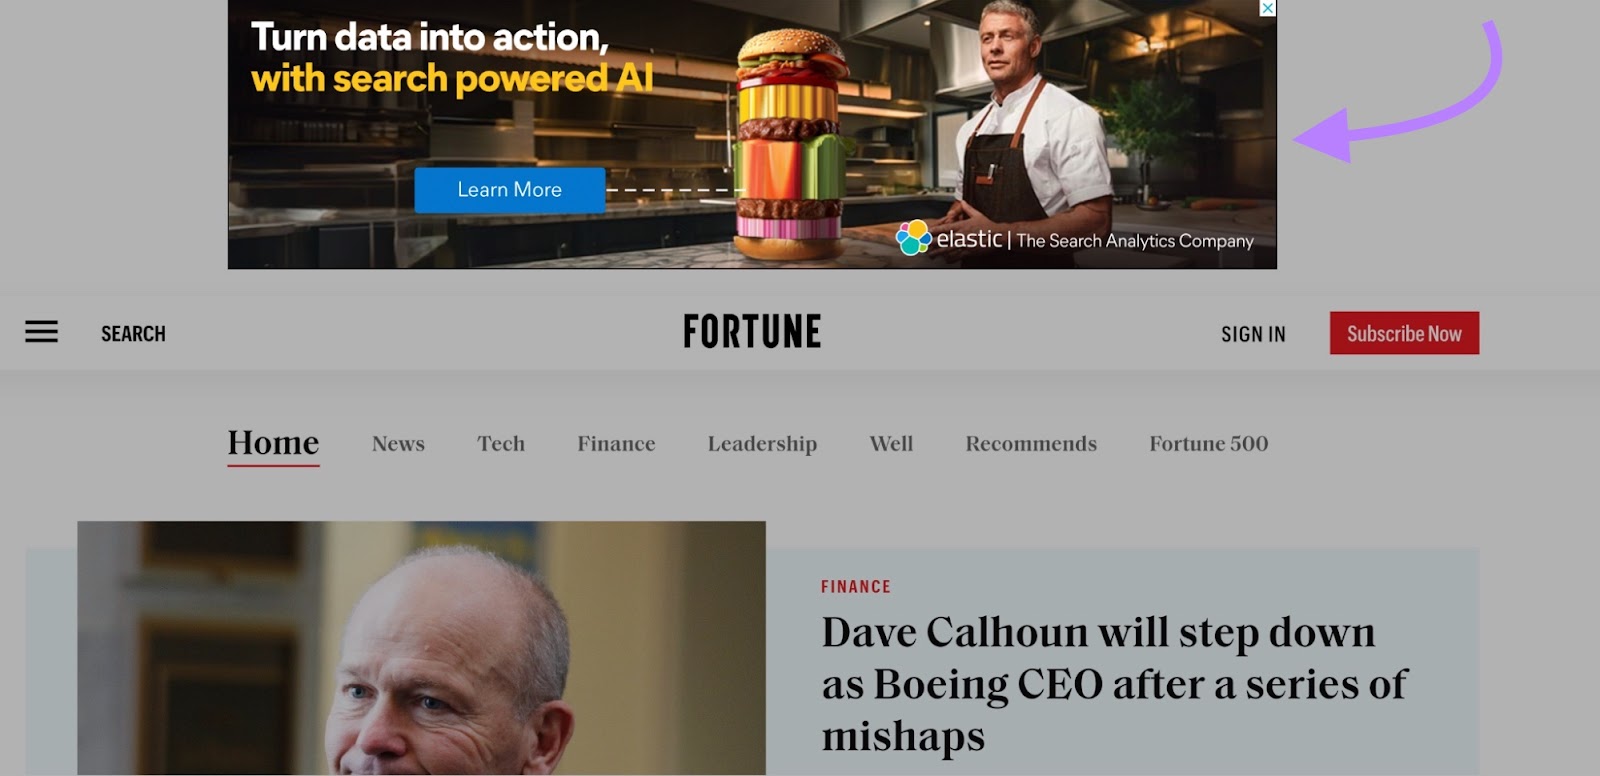 Elastic's banner ad on Fortune site